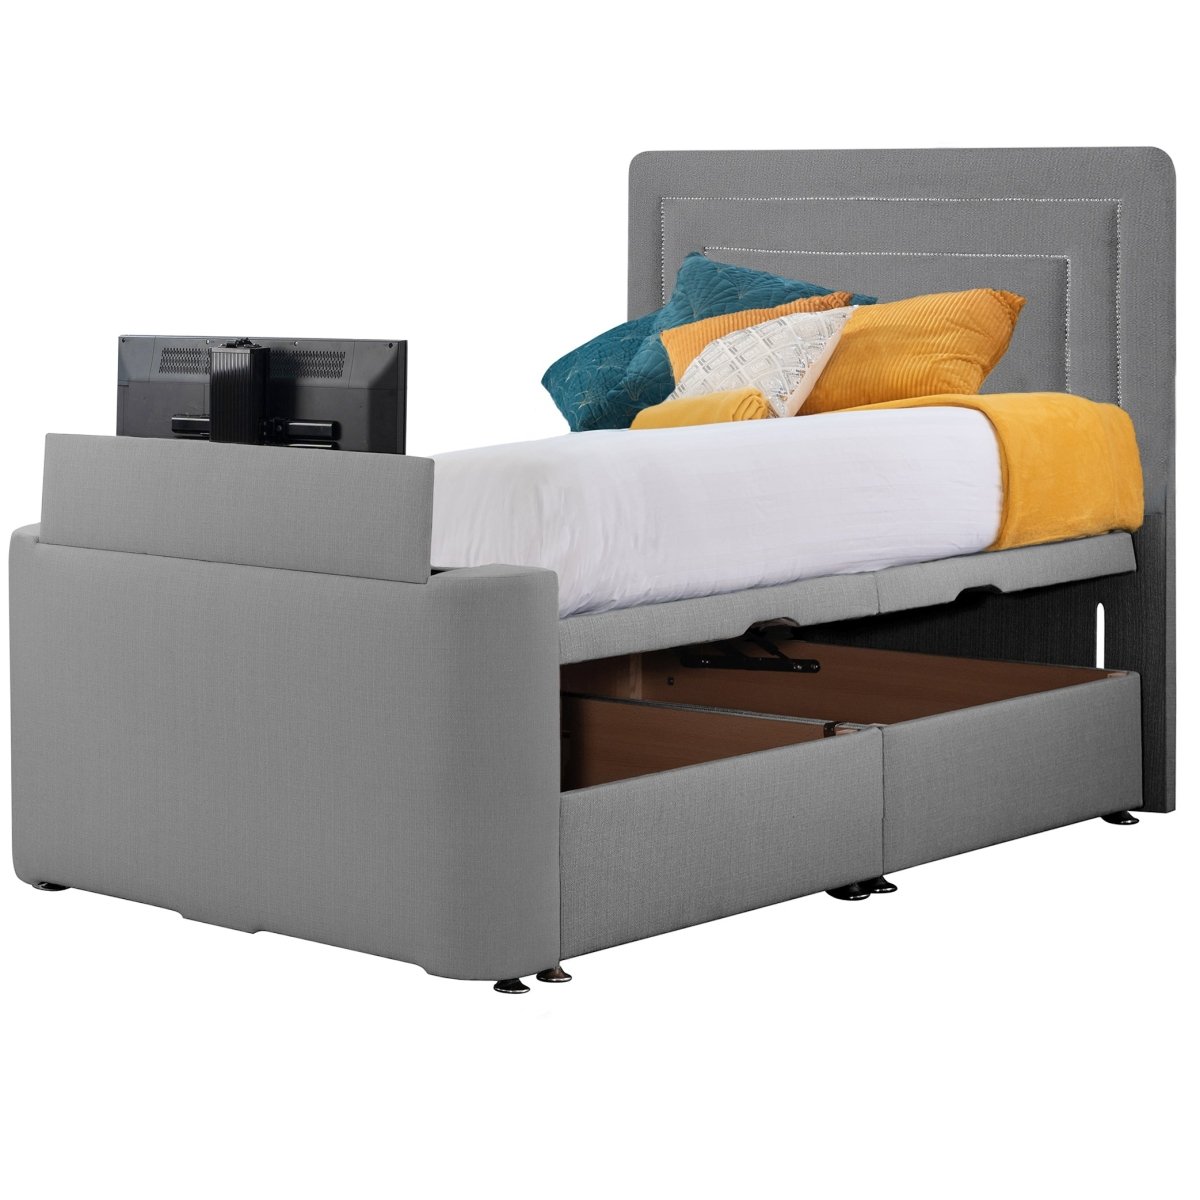 Image Brogan TV Bed By Sweet Dreams - TV Beds Northwest - choose your colour tvbed - doubletvbed